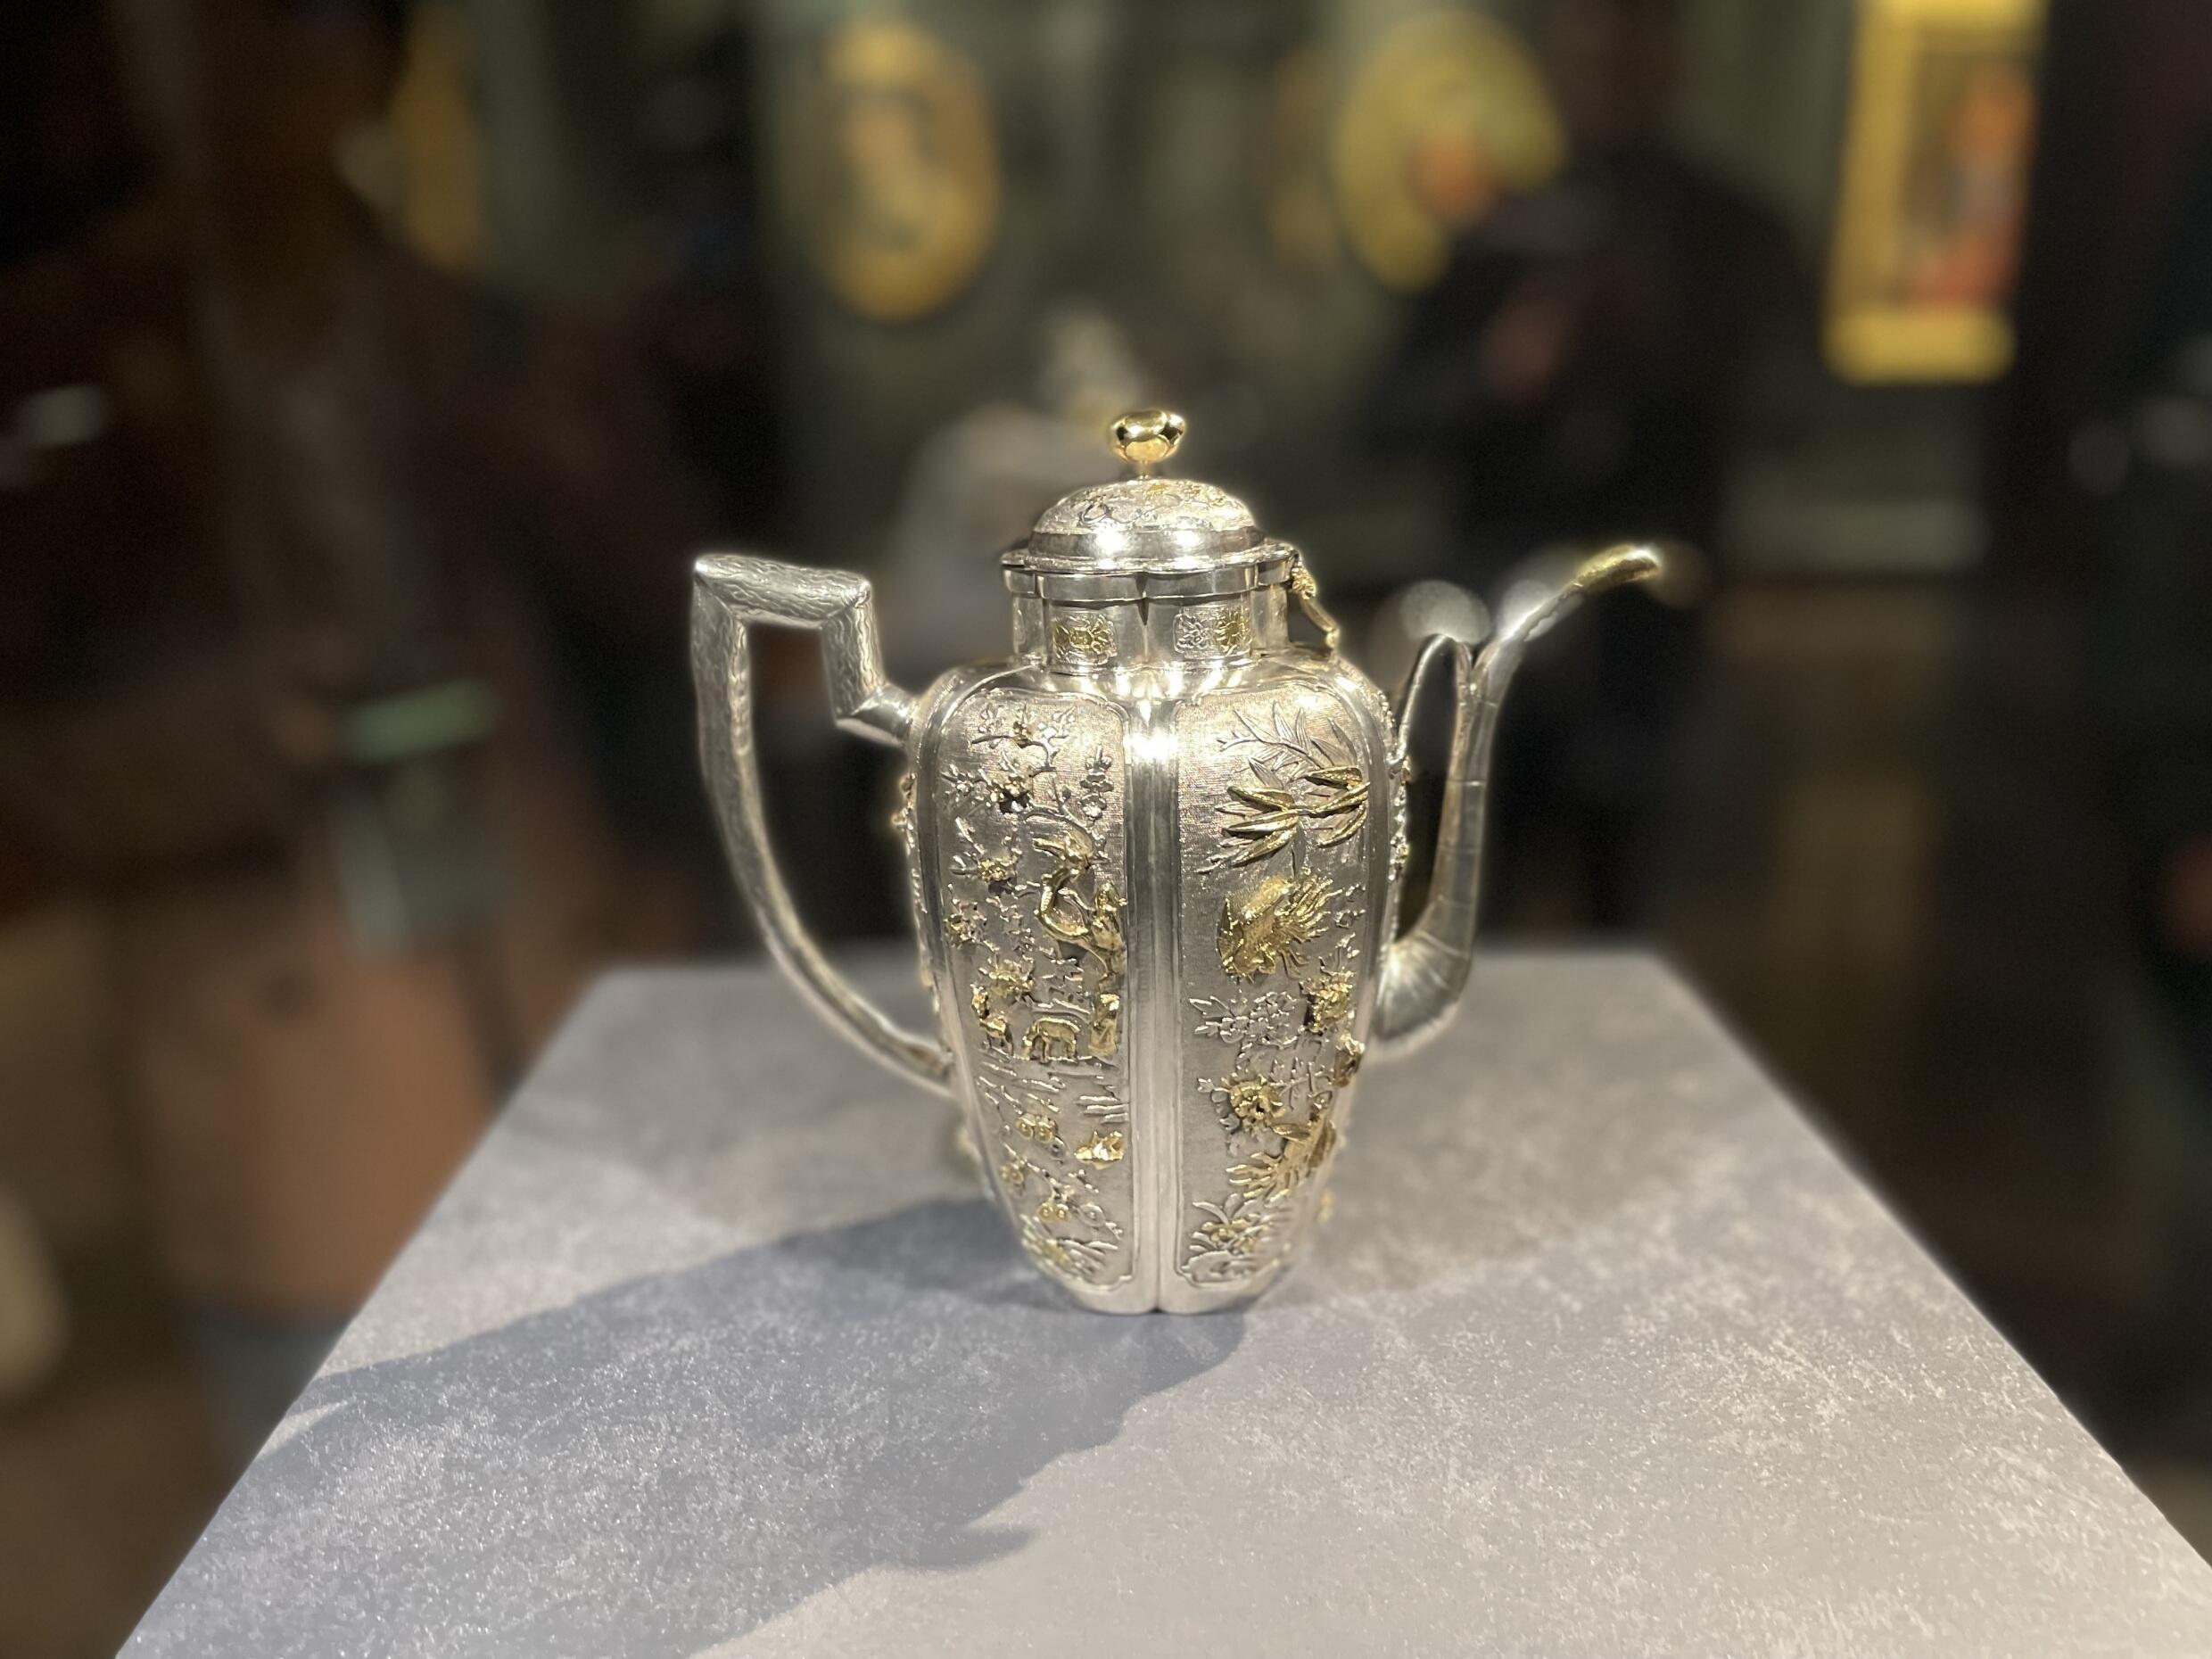 Chinese silver jug, part of the gifts from Siamese ambassadors to the French court.